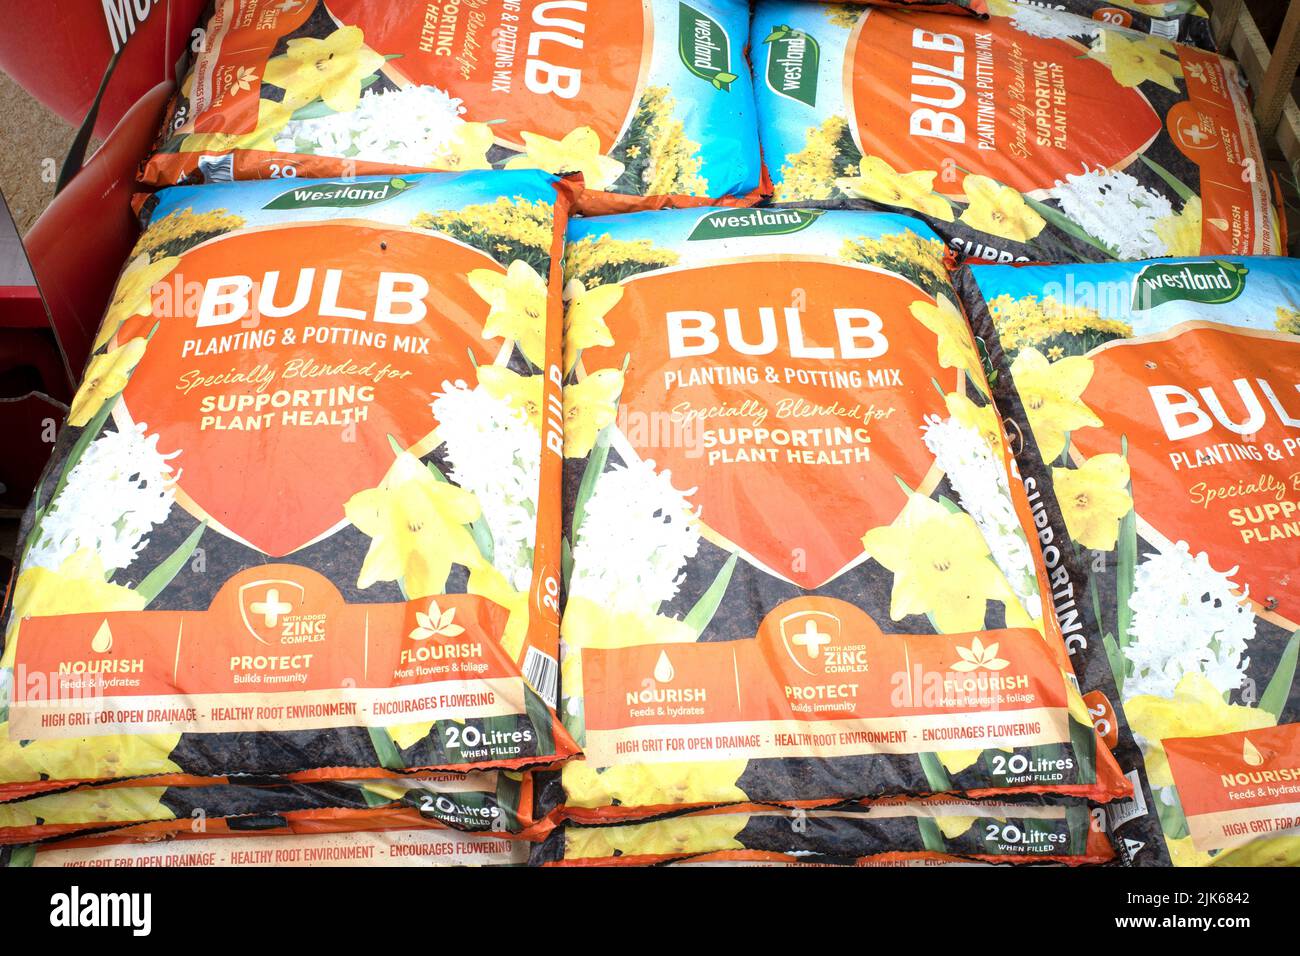 A stack of orange bags of Westland bulb planting and potting mix  in a garden centre Stock Photo